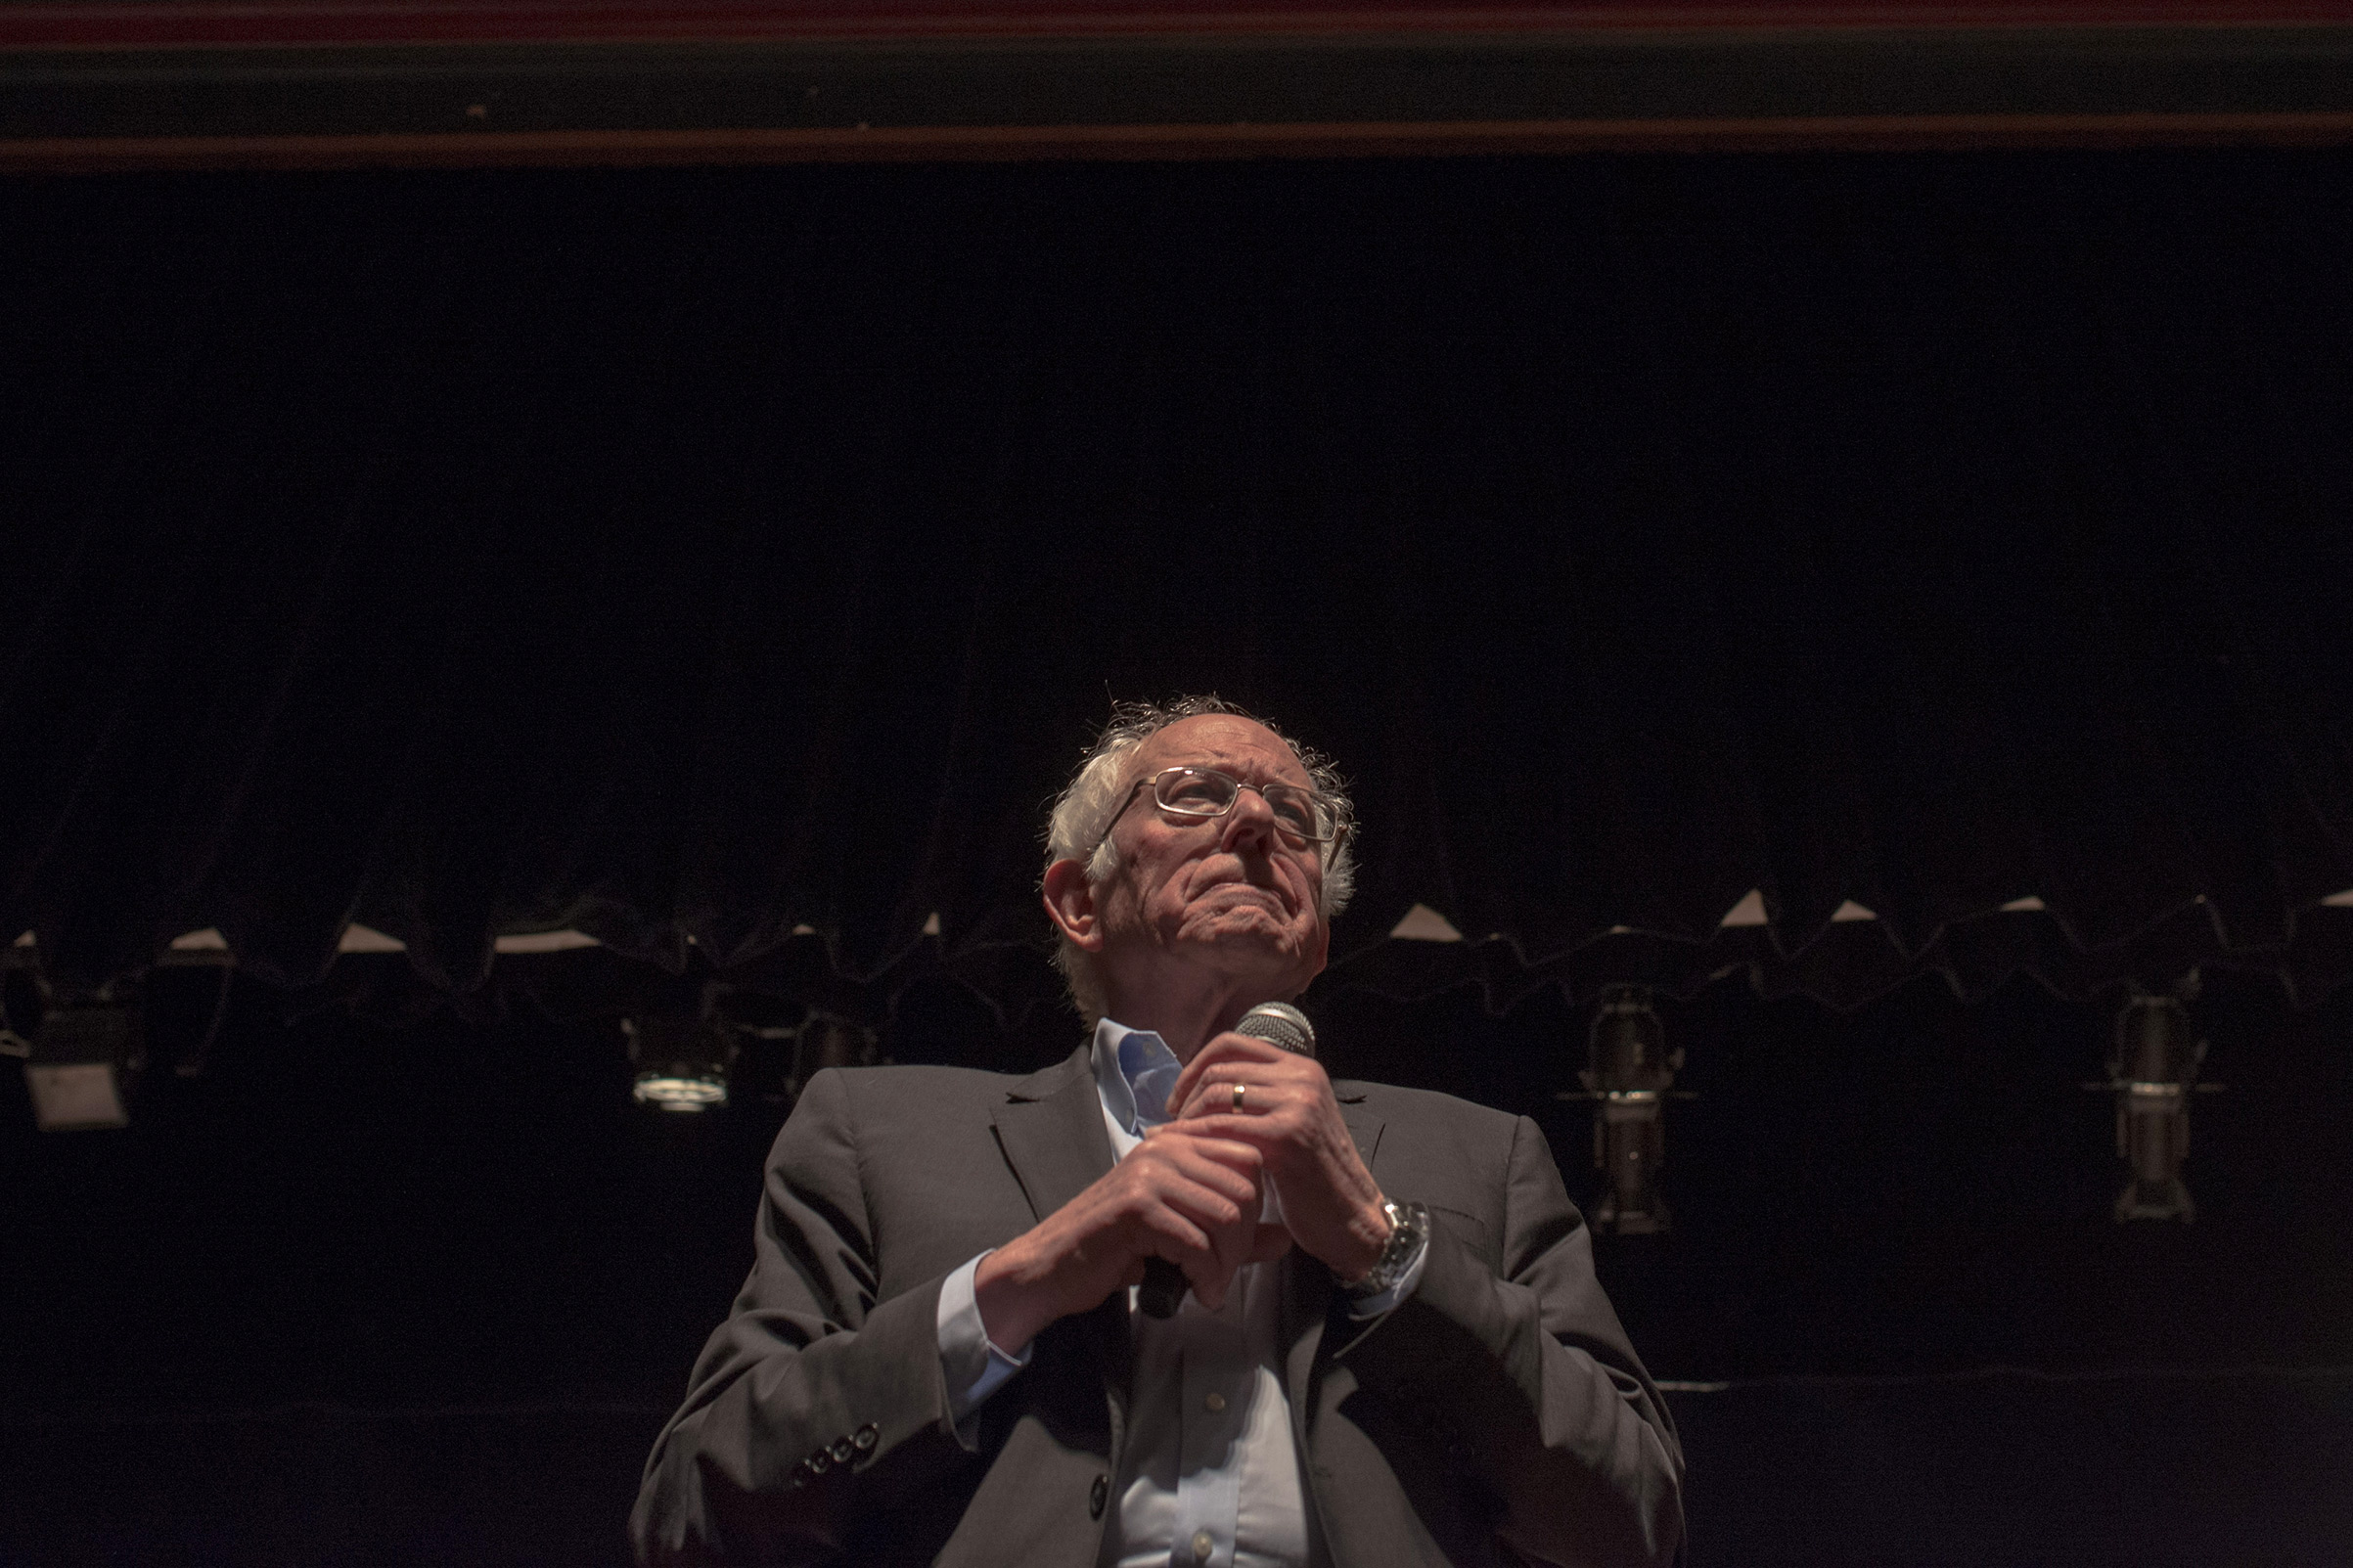 Democratic presidential candidate Sen. Bernie Sanders (I-VT) at a campaign rally in Ames, Iowa, Jan. 26, 2020. (September Dawn Bottoms for TIME)